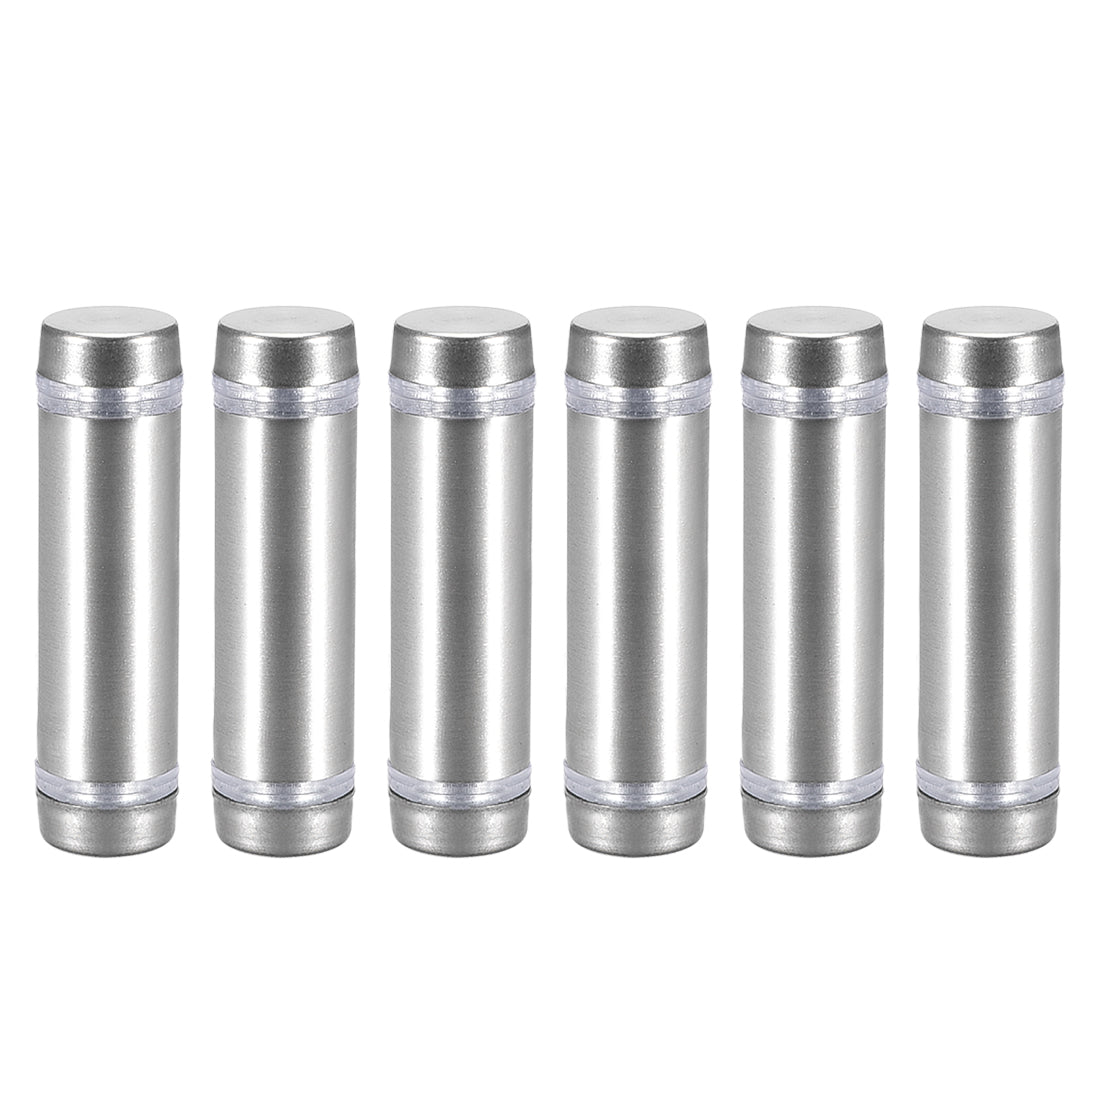 uxcell Uxcell Glass Standoff Double Head Stainless Steel Standoff Holder 12mm x 44mm 6 Pcs